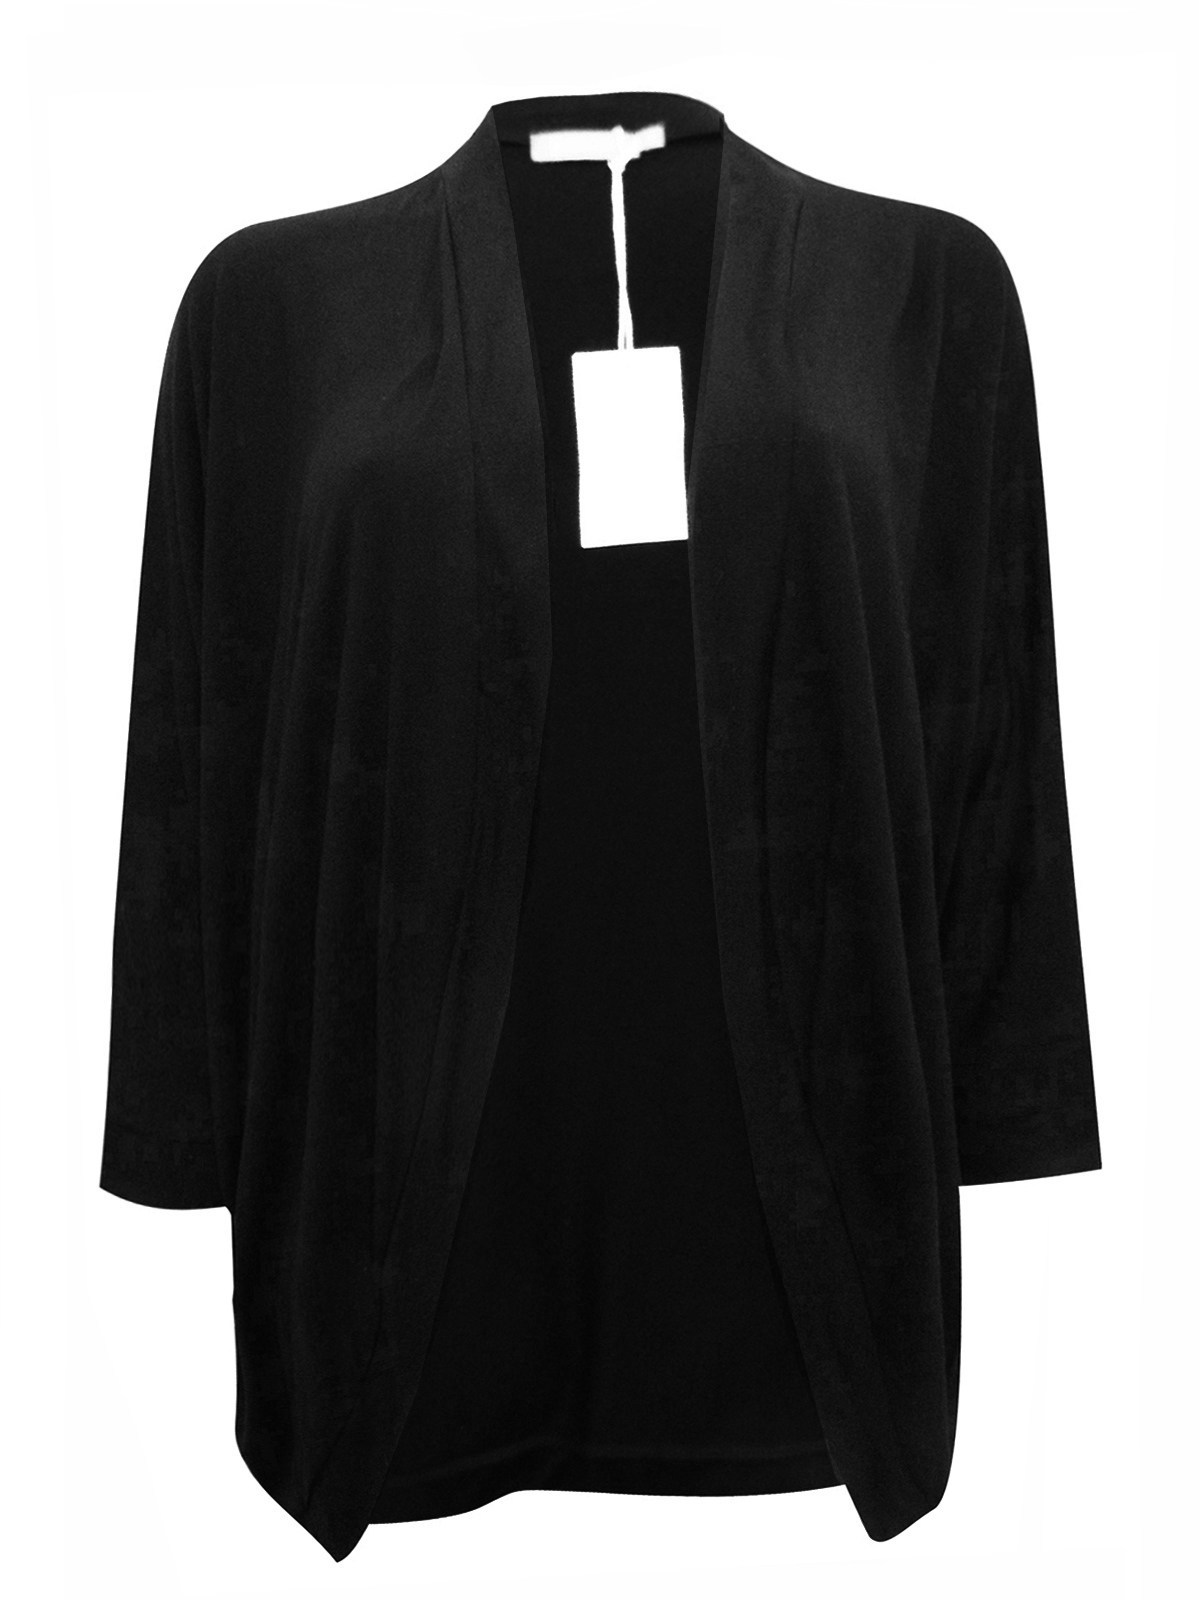 First Avenue BLACK Open Front Jersey Cardigan - Size 10 to 20